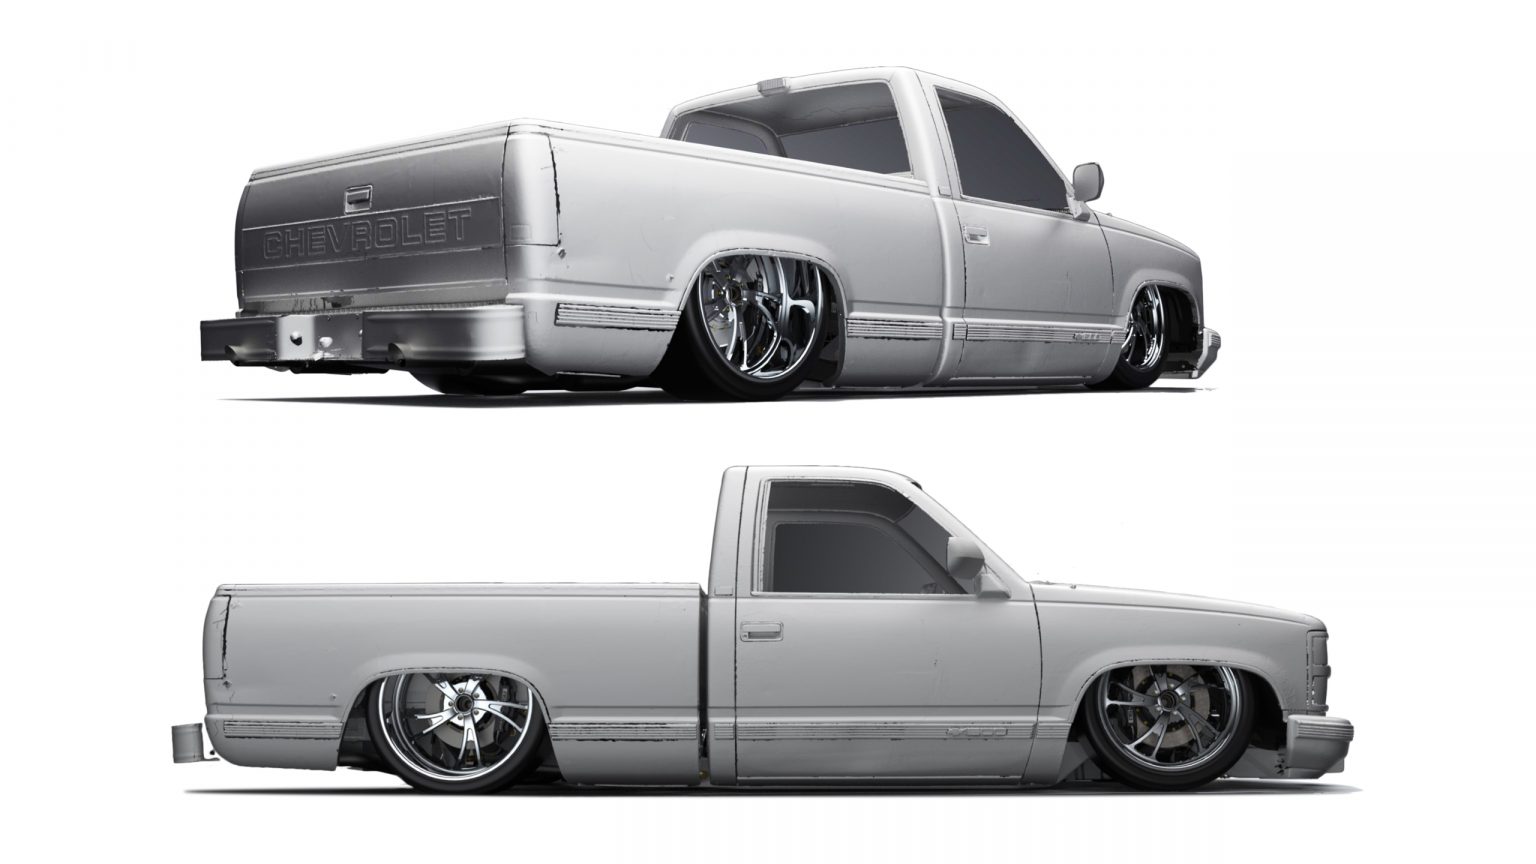 Roadster Shop Debuts LowPro Chevy OBS Chassis At SEMA